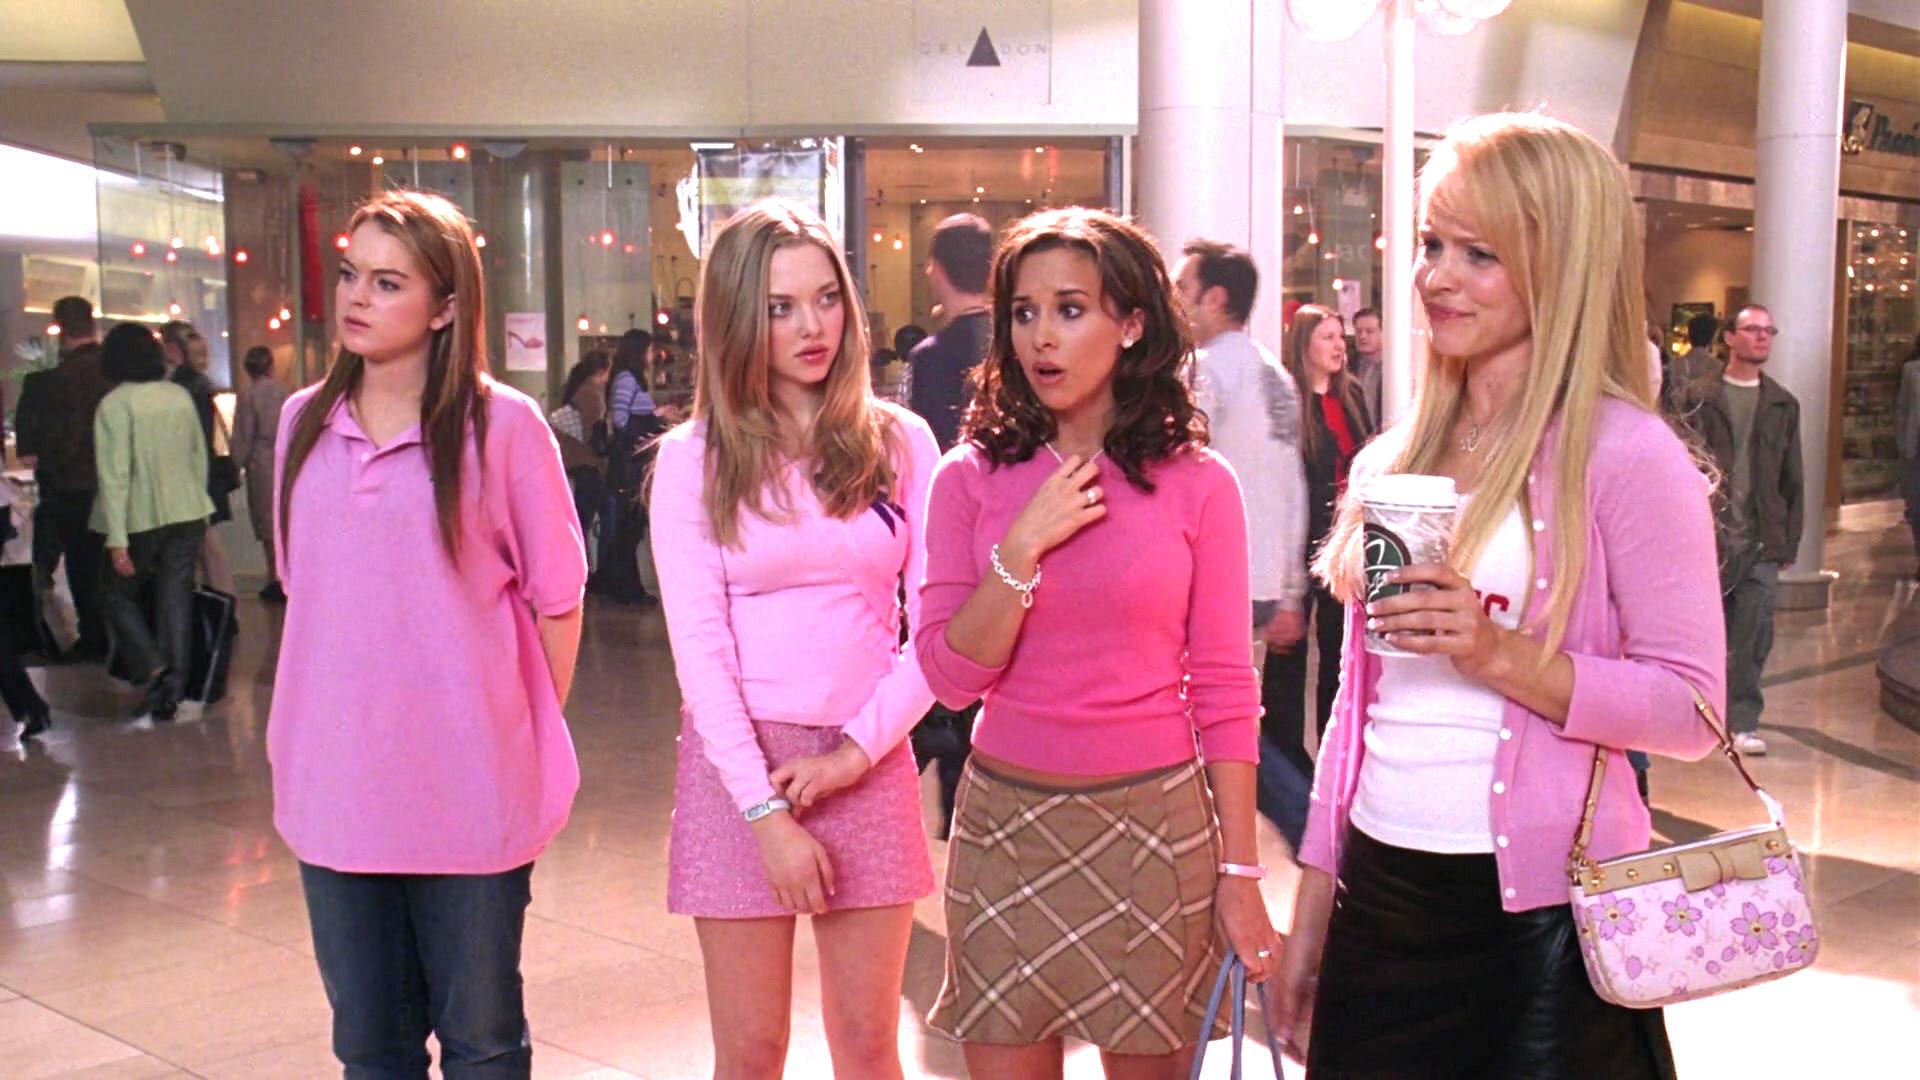 The 'Mean Girls' Cast Reunion For The Las Vegas Shooting